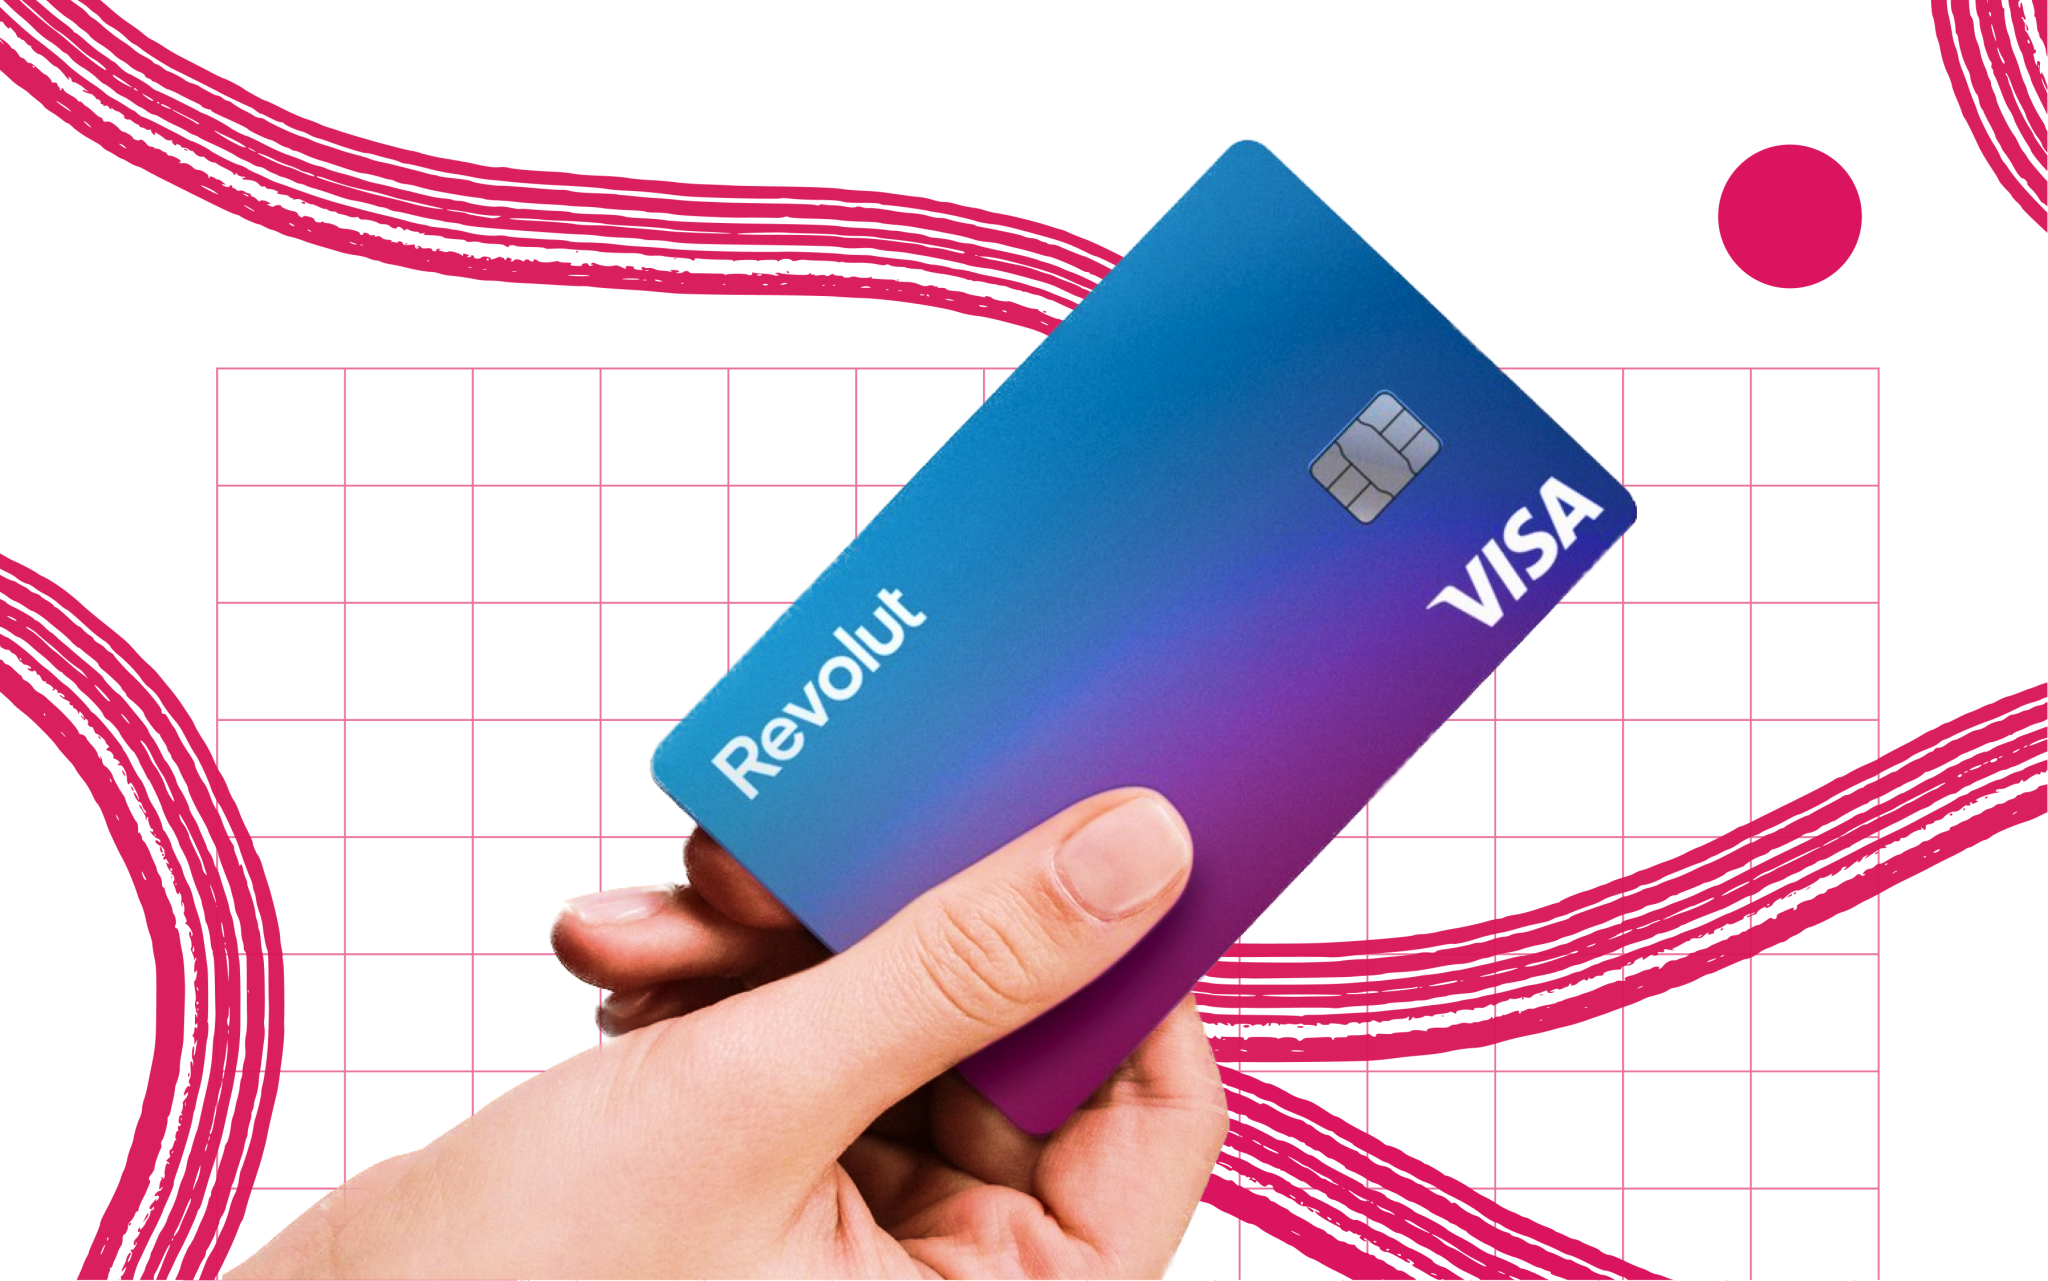 A designed image of someone holding a revolut debit card